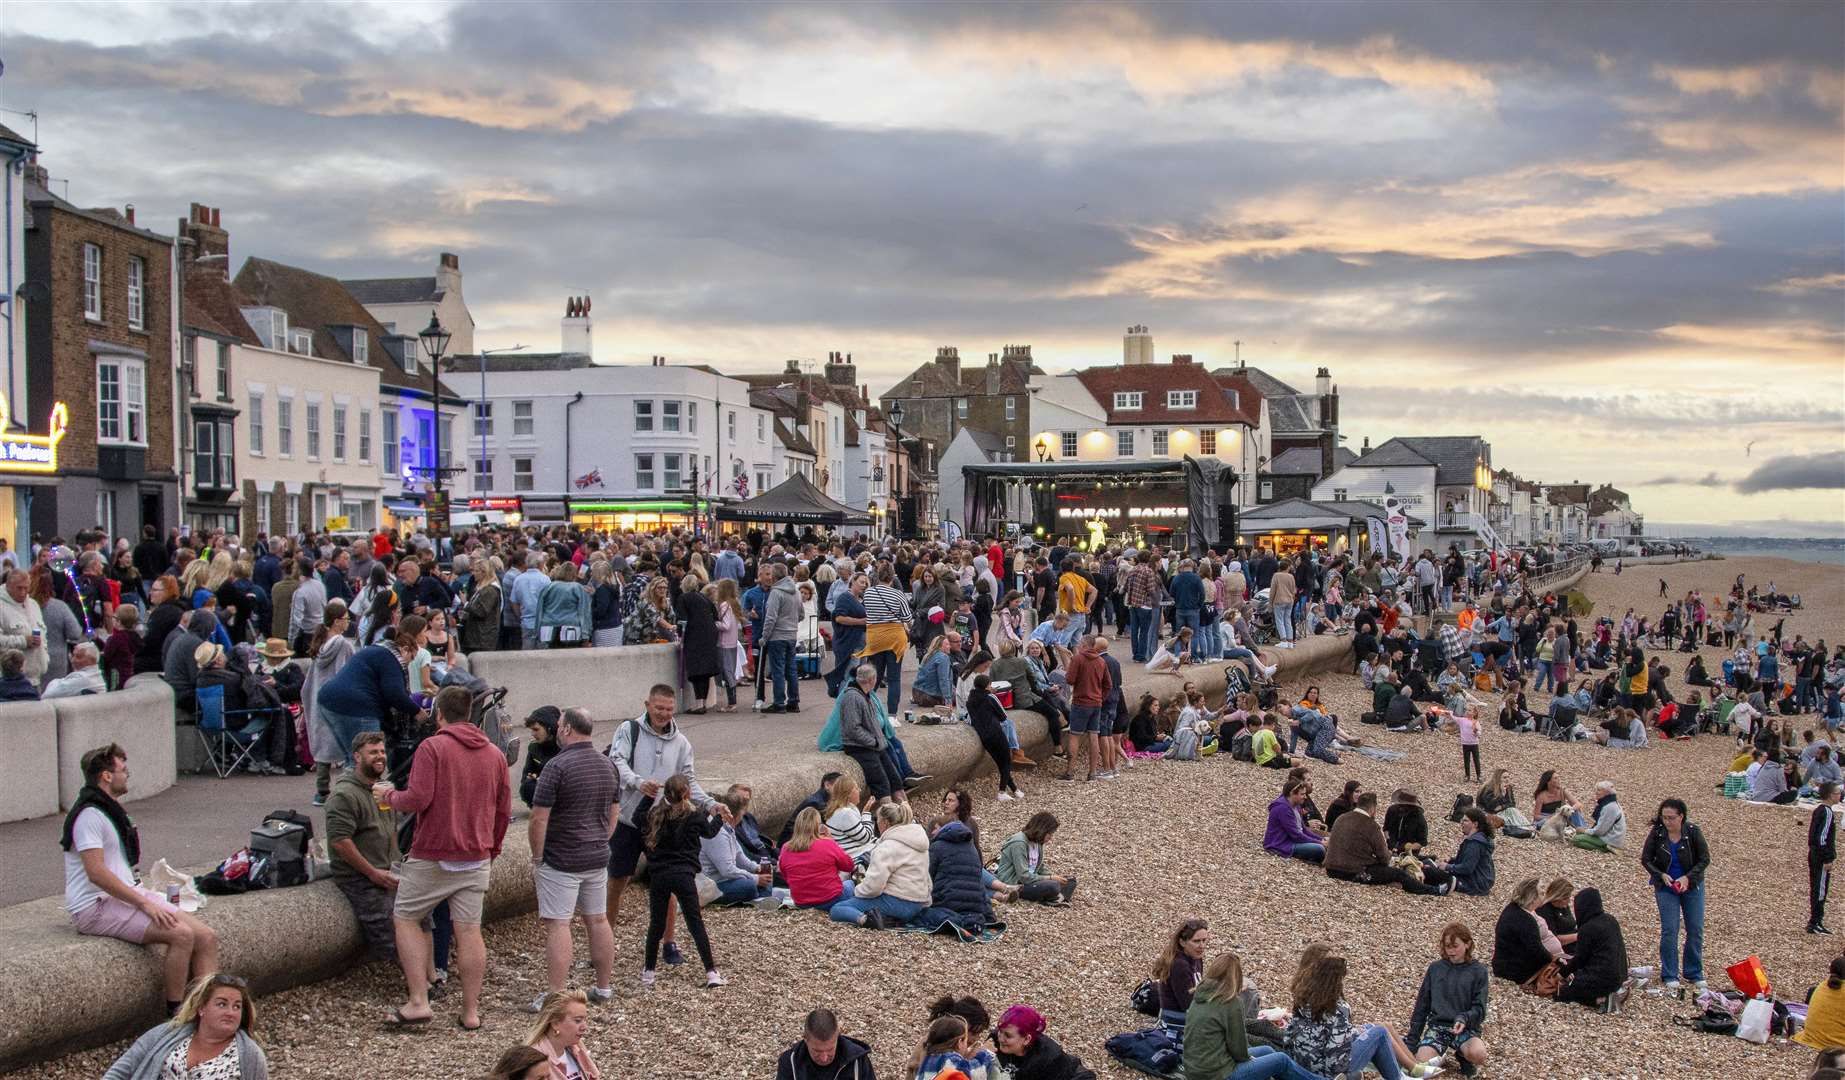 Thousands of people attended Party on the Prom on Wednesday night. Picture: Chris Mansfield